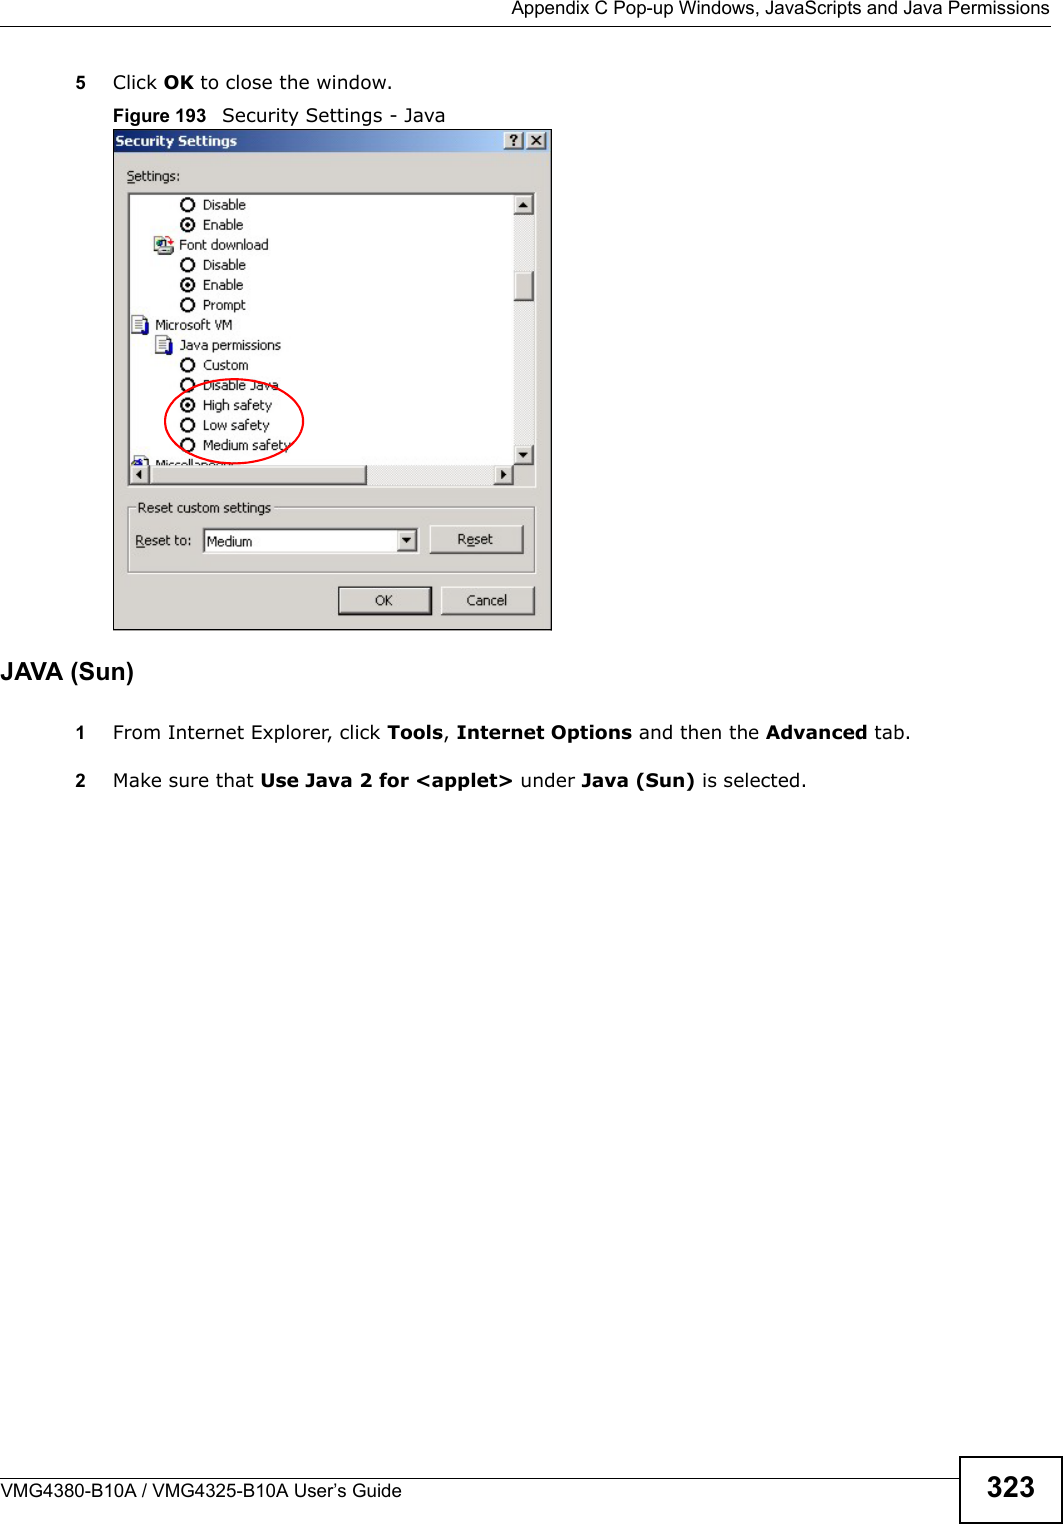 Appendix C Pop-up Windows, JavaScripts and Java PermissionsVMG4380-B10A / VMG4325-B10A User’s Guide 3235Click OK to close the window.Figure 193   Security Settings - JavaJAVA (Sun)1From Internet Explorer, click Tools, Internet Options and then the Advanced tab.2Make sure that Use Java 2 for &lt;applet&gt; under Java (Sun) is selected.